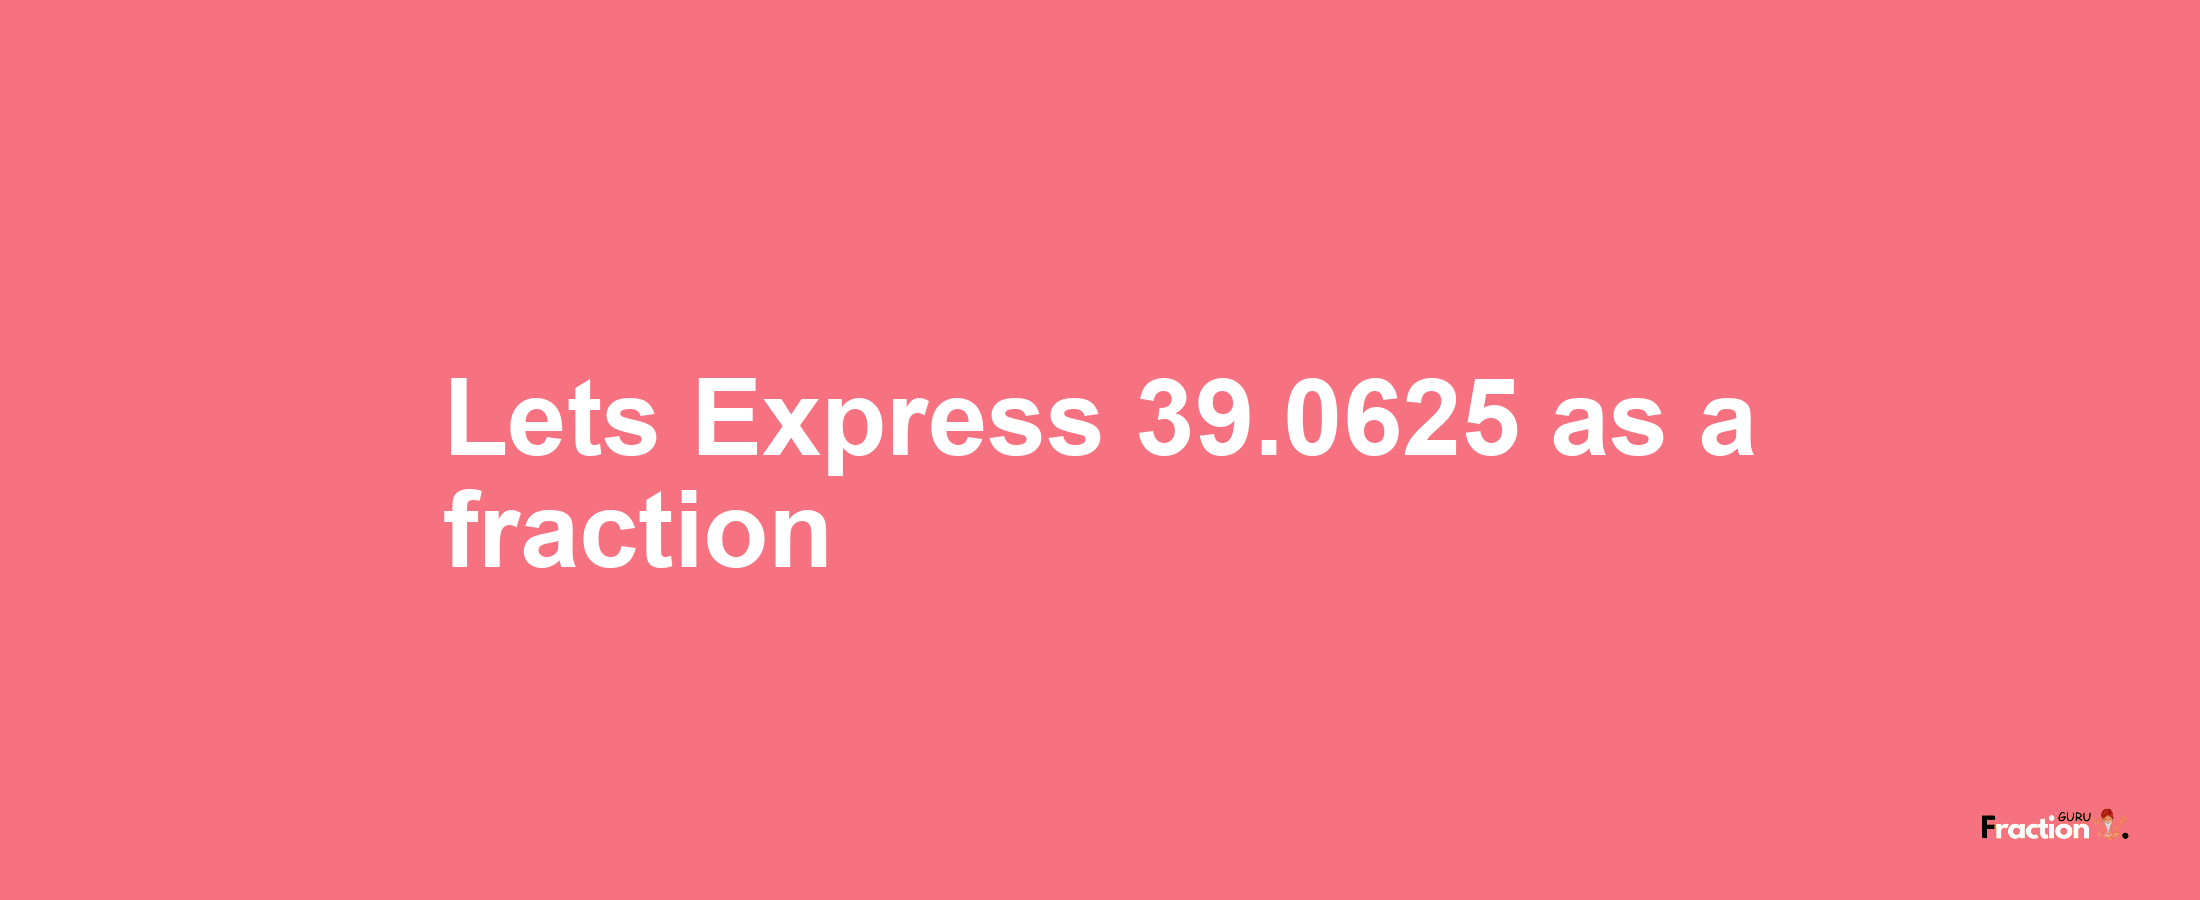 Lets Express 39.0625 as afraction